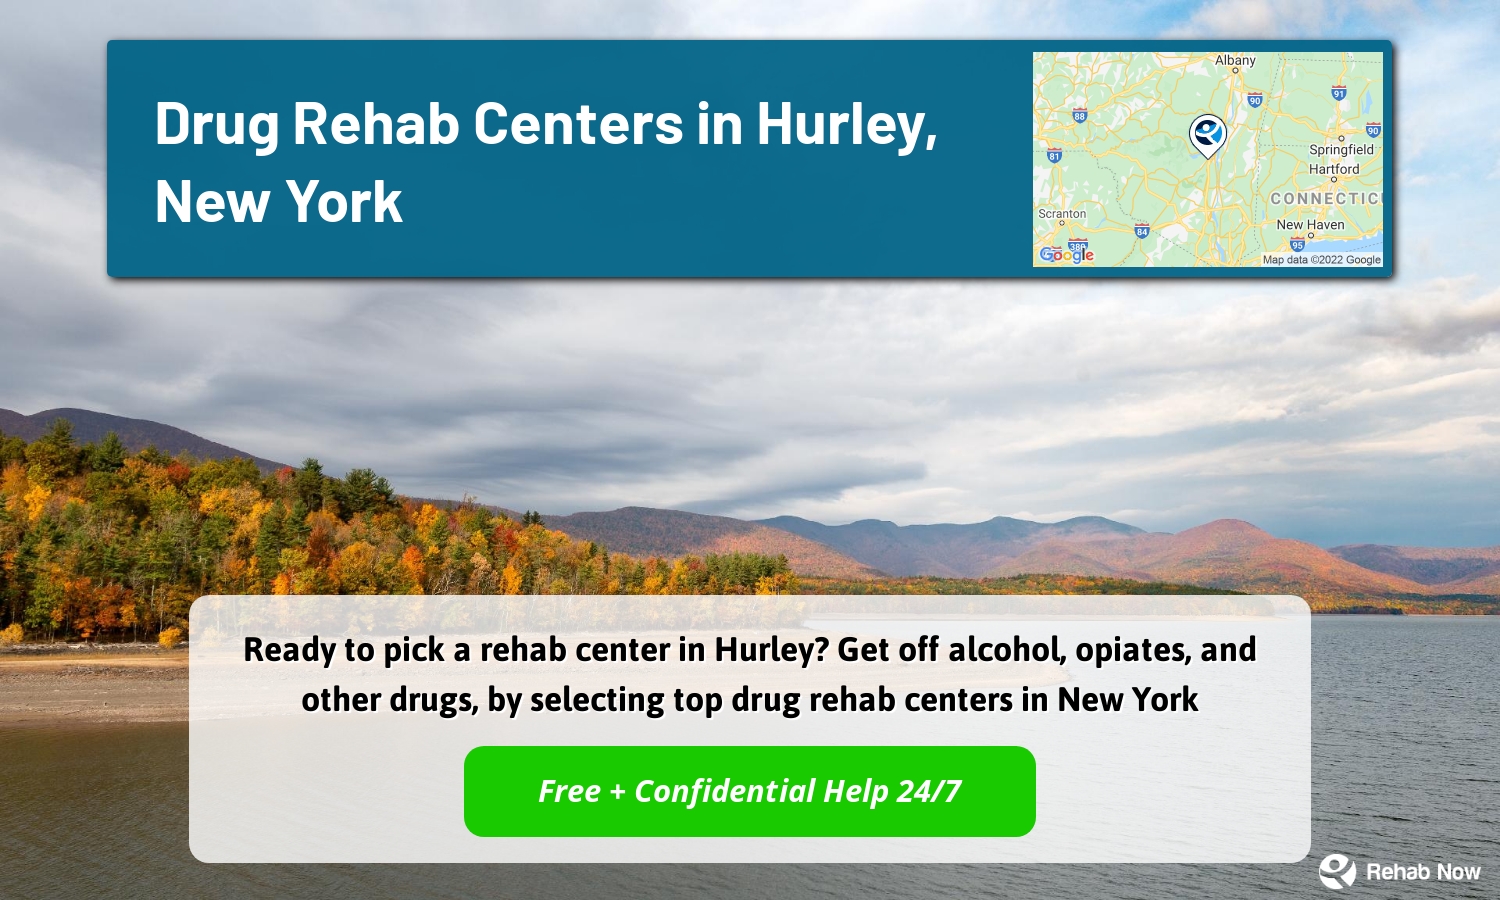 Ready to pick a rehab center in Hurley? Get off alcohol, opiates, and other drugs, by selecting top drug rehab centers in New York